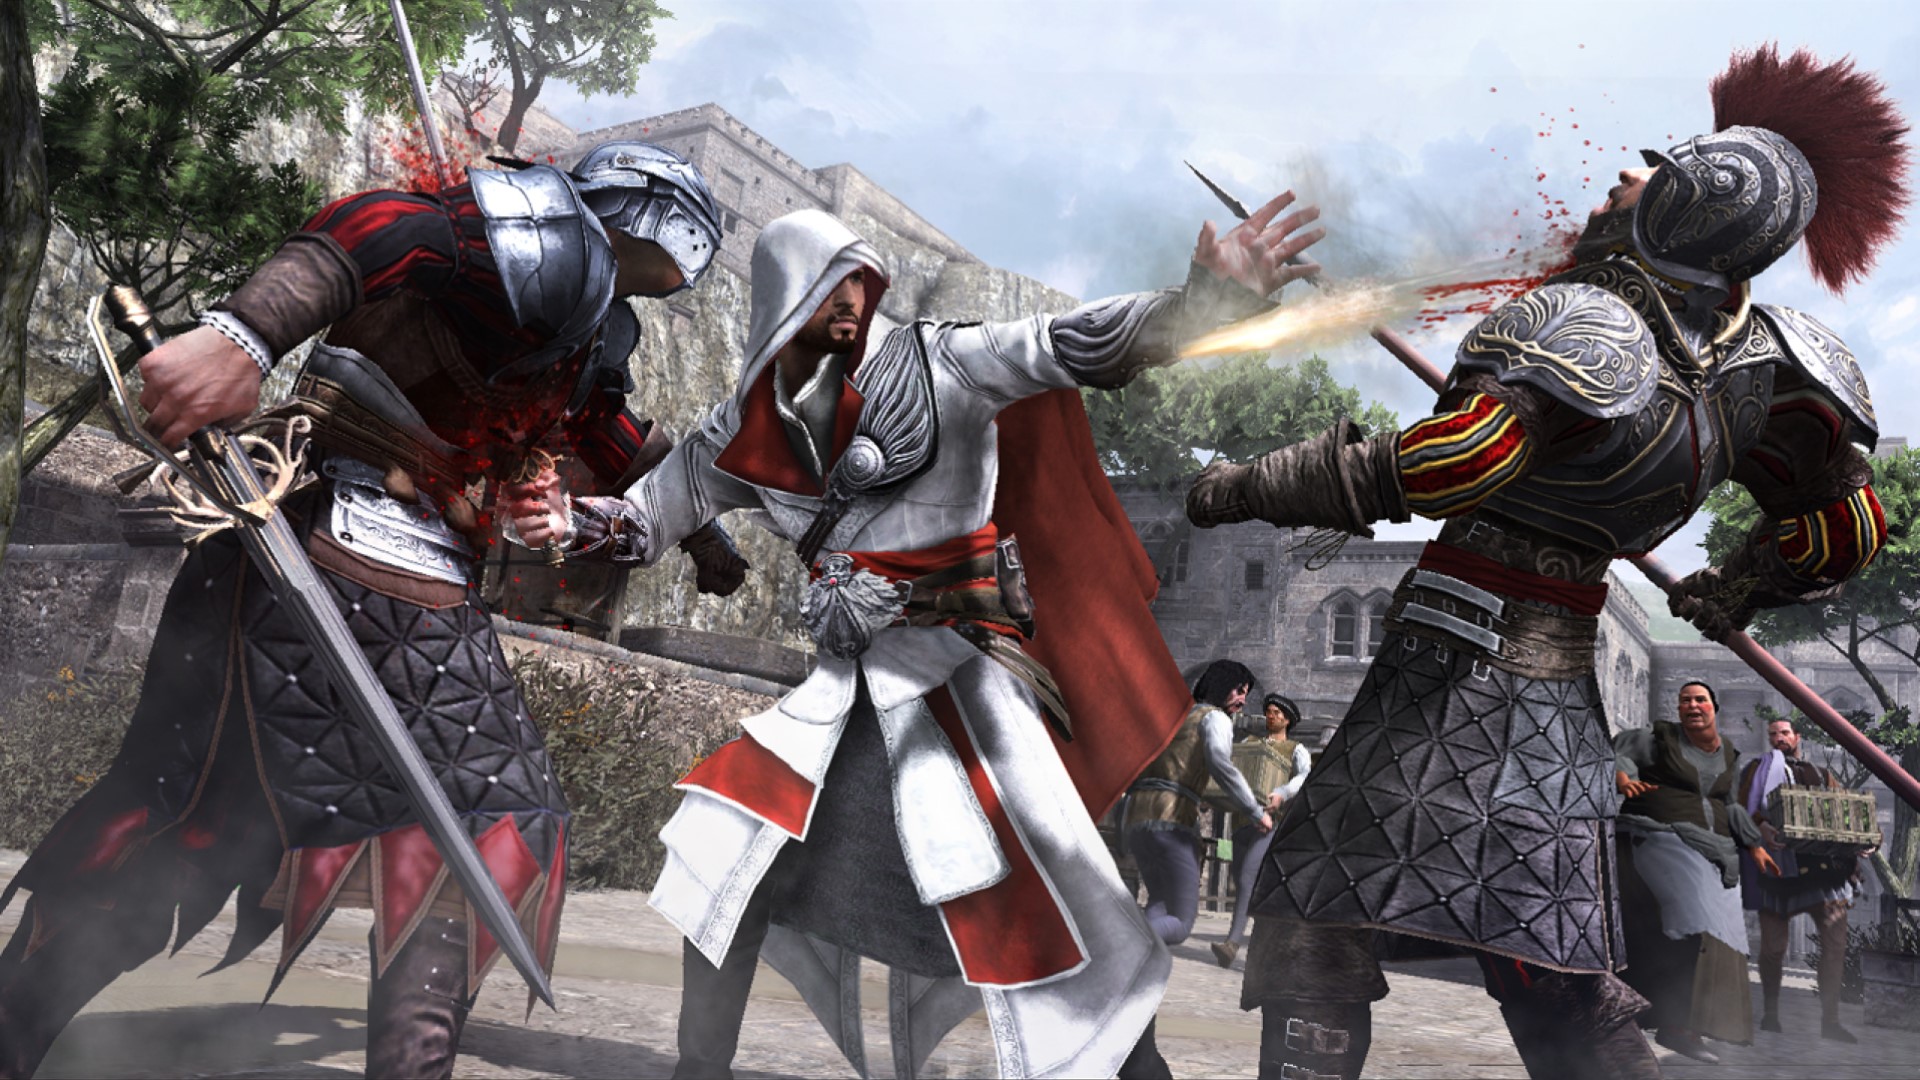 Old Assassin's Creed games will stay available after 'decommissioning'